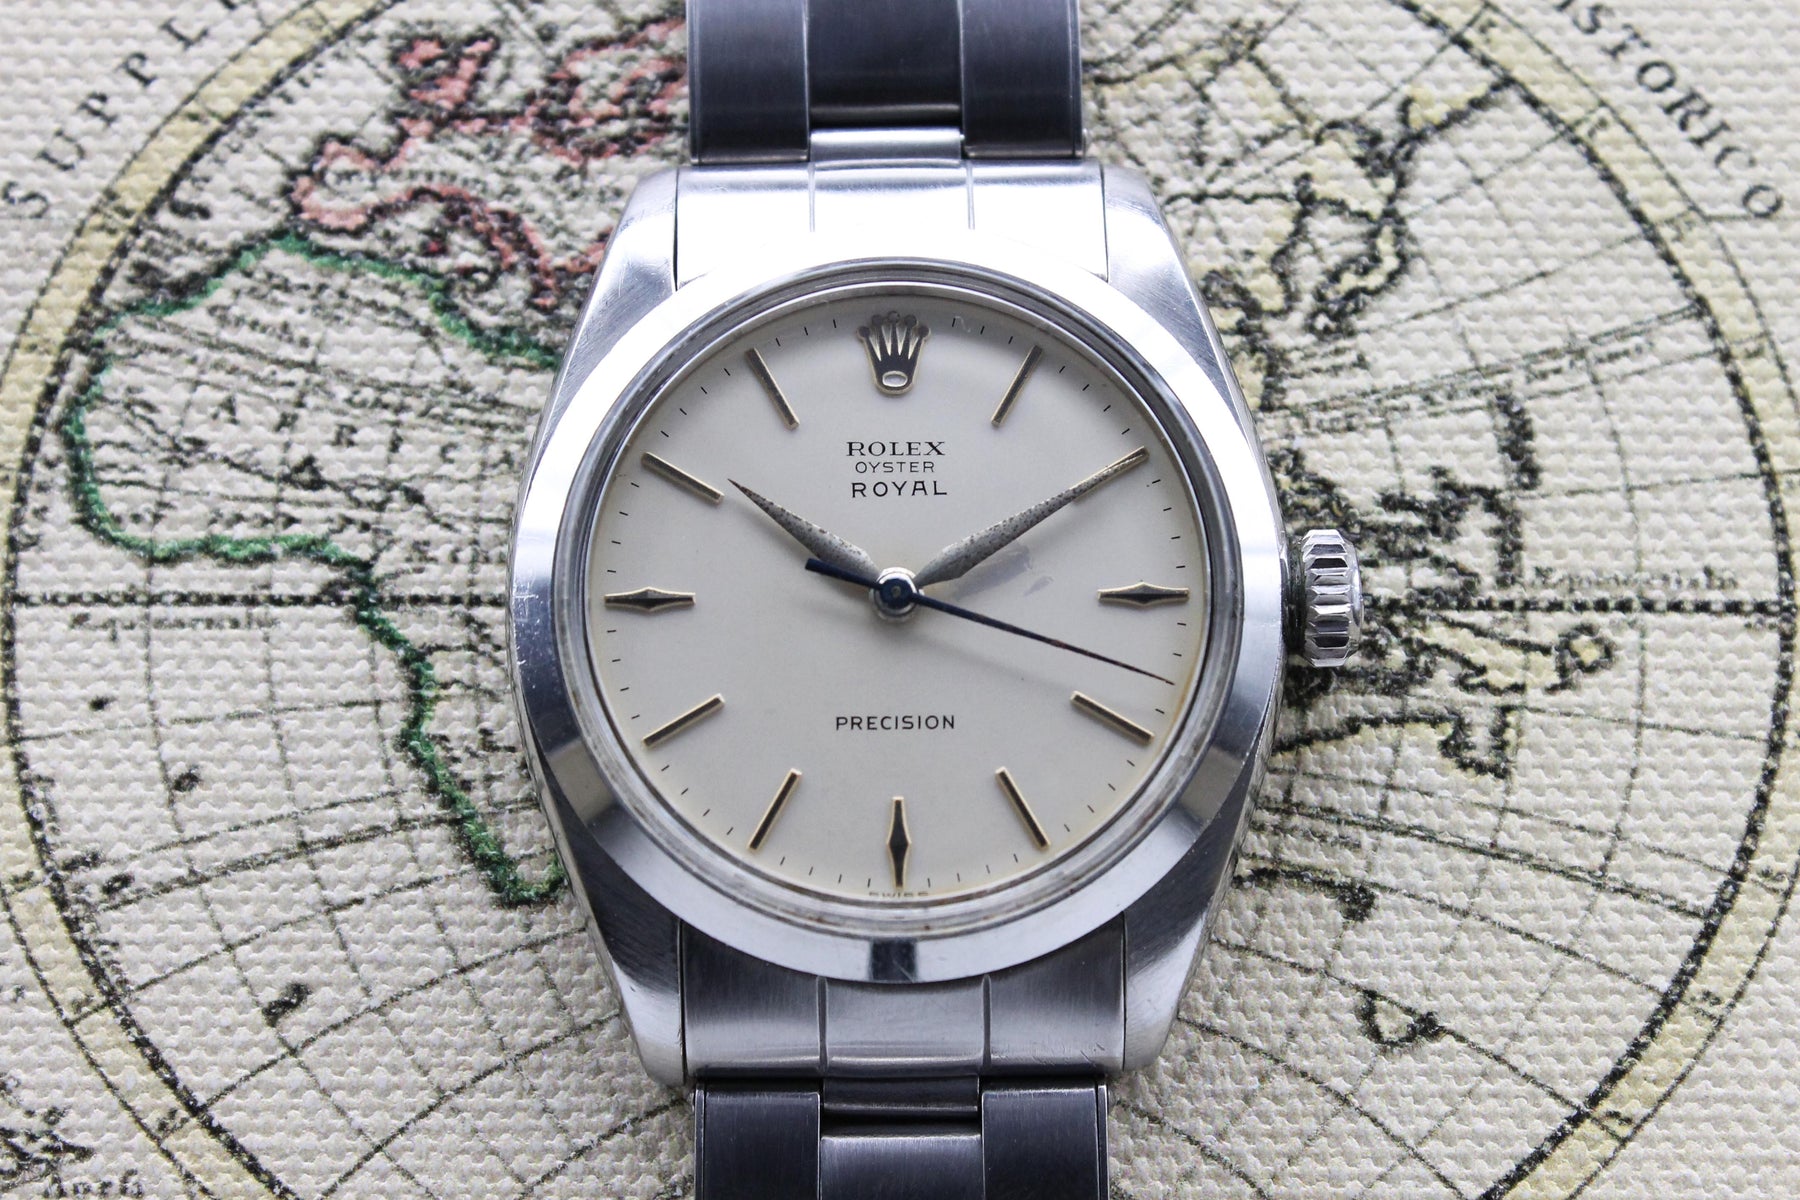 Rolex Precision Ref. 6426 Year 1961 (with Papers)